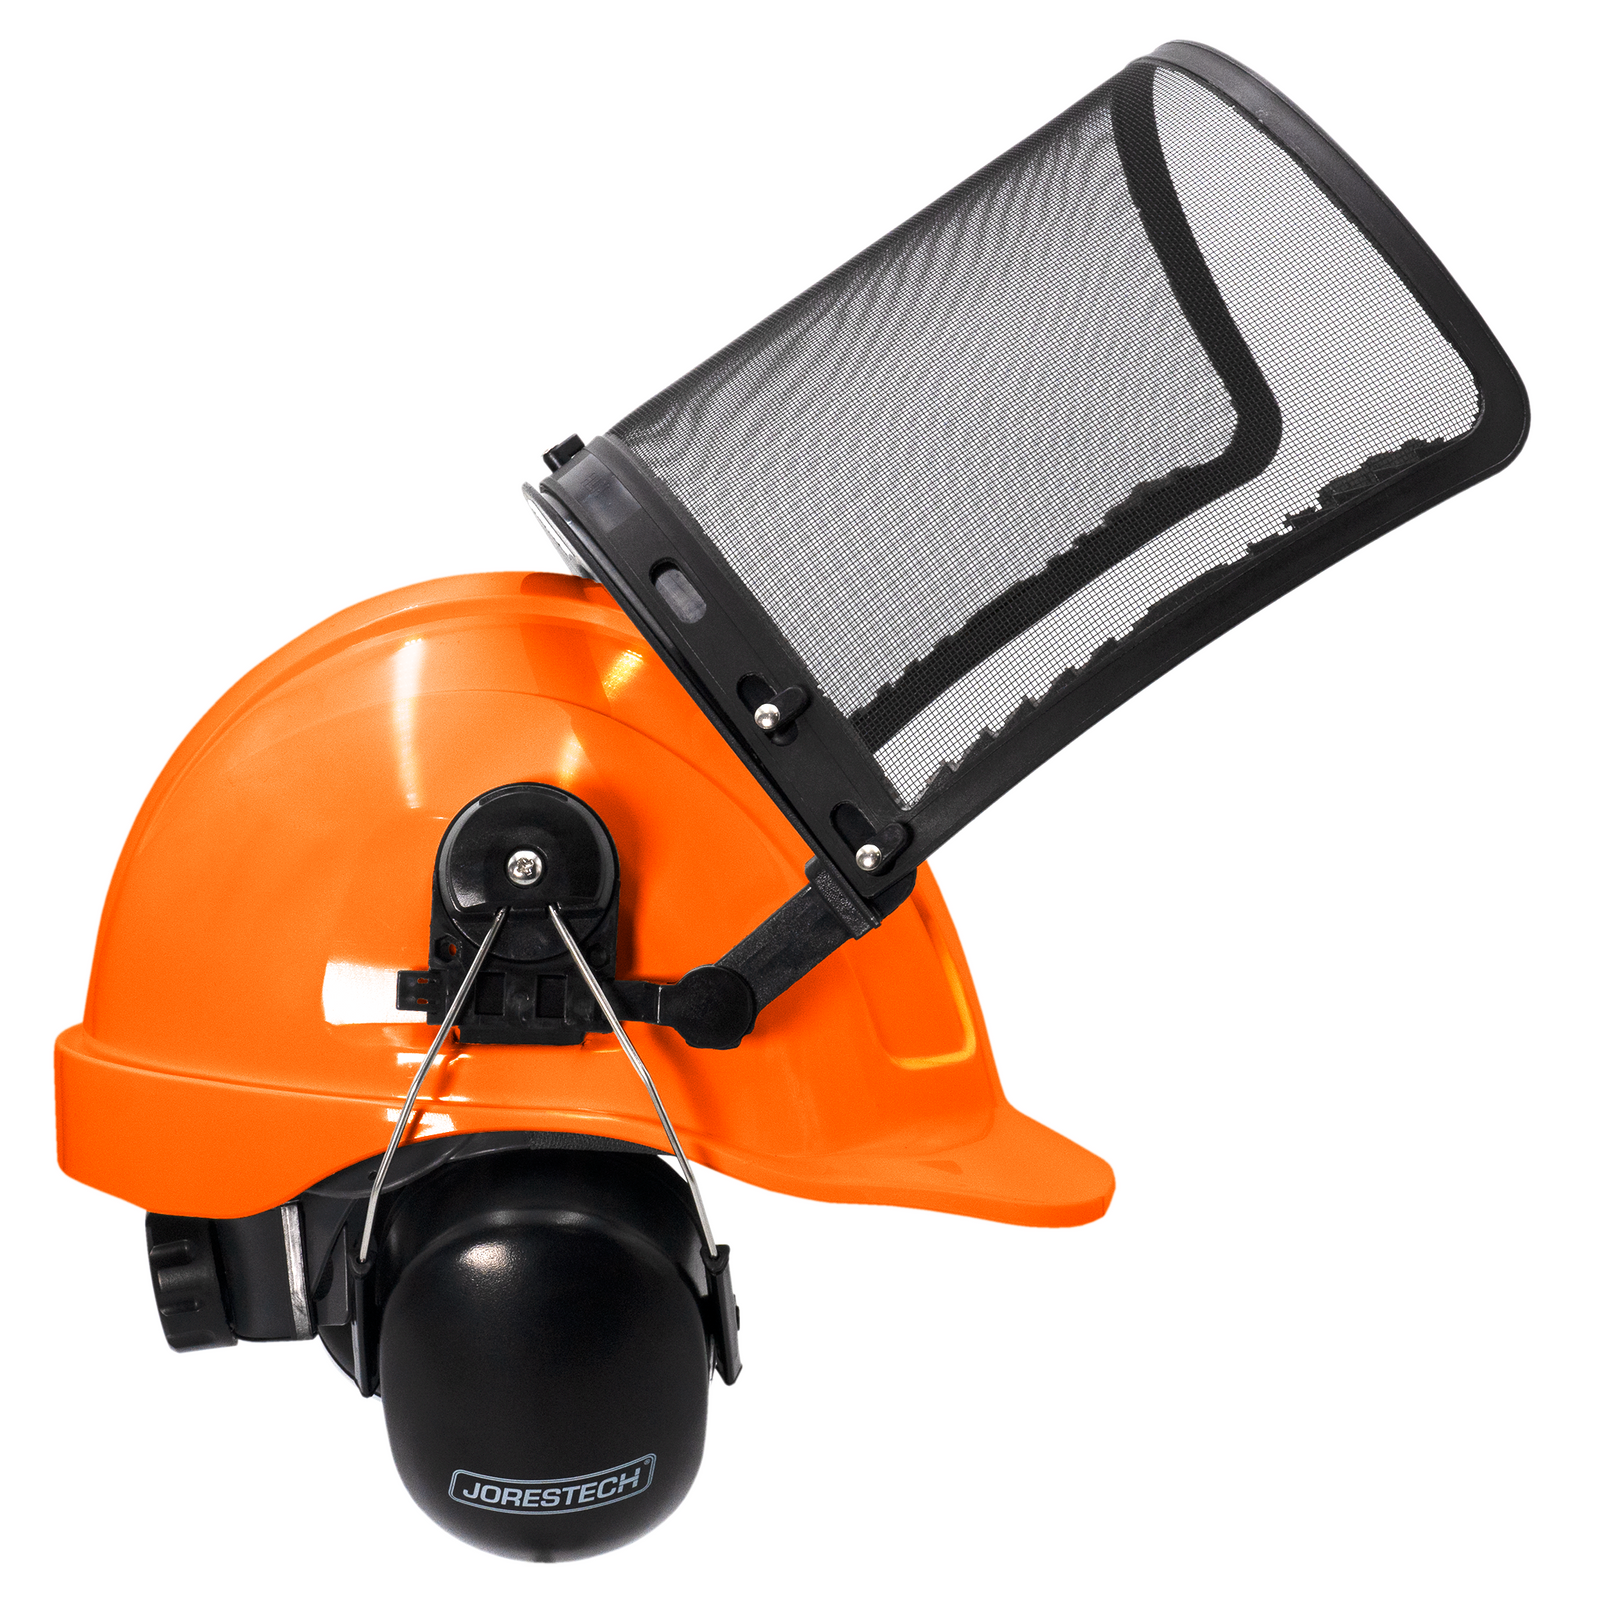 safety cap style hard hat kit with iron mesh face shield and earmuffs for hearing and head protection